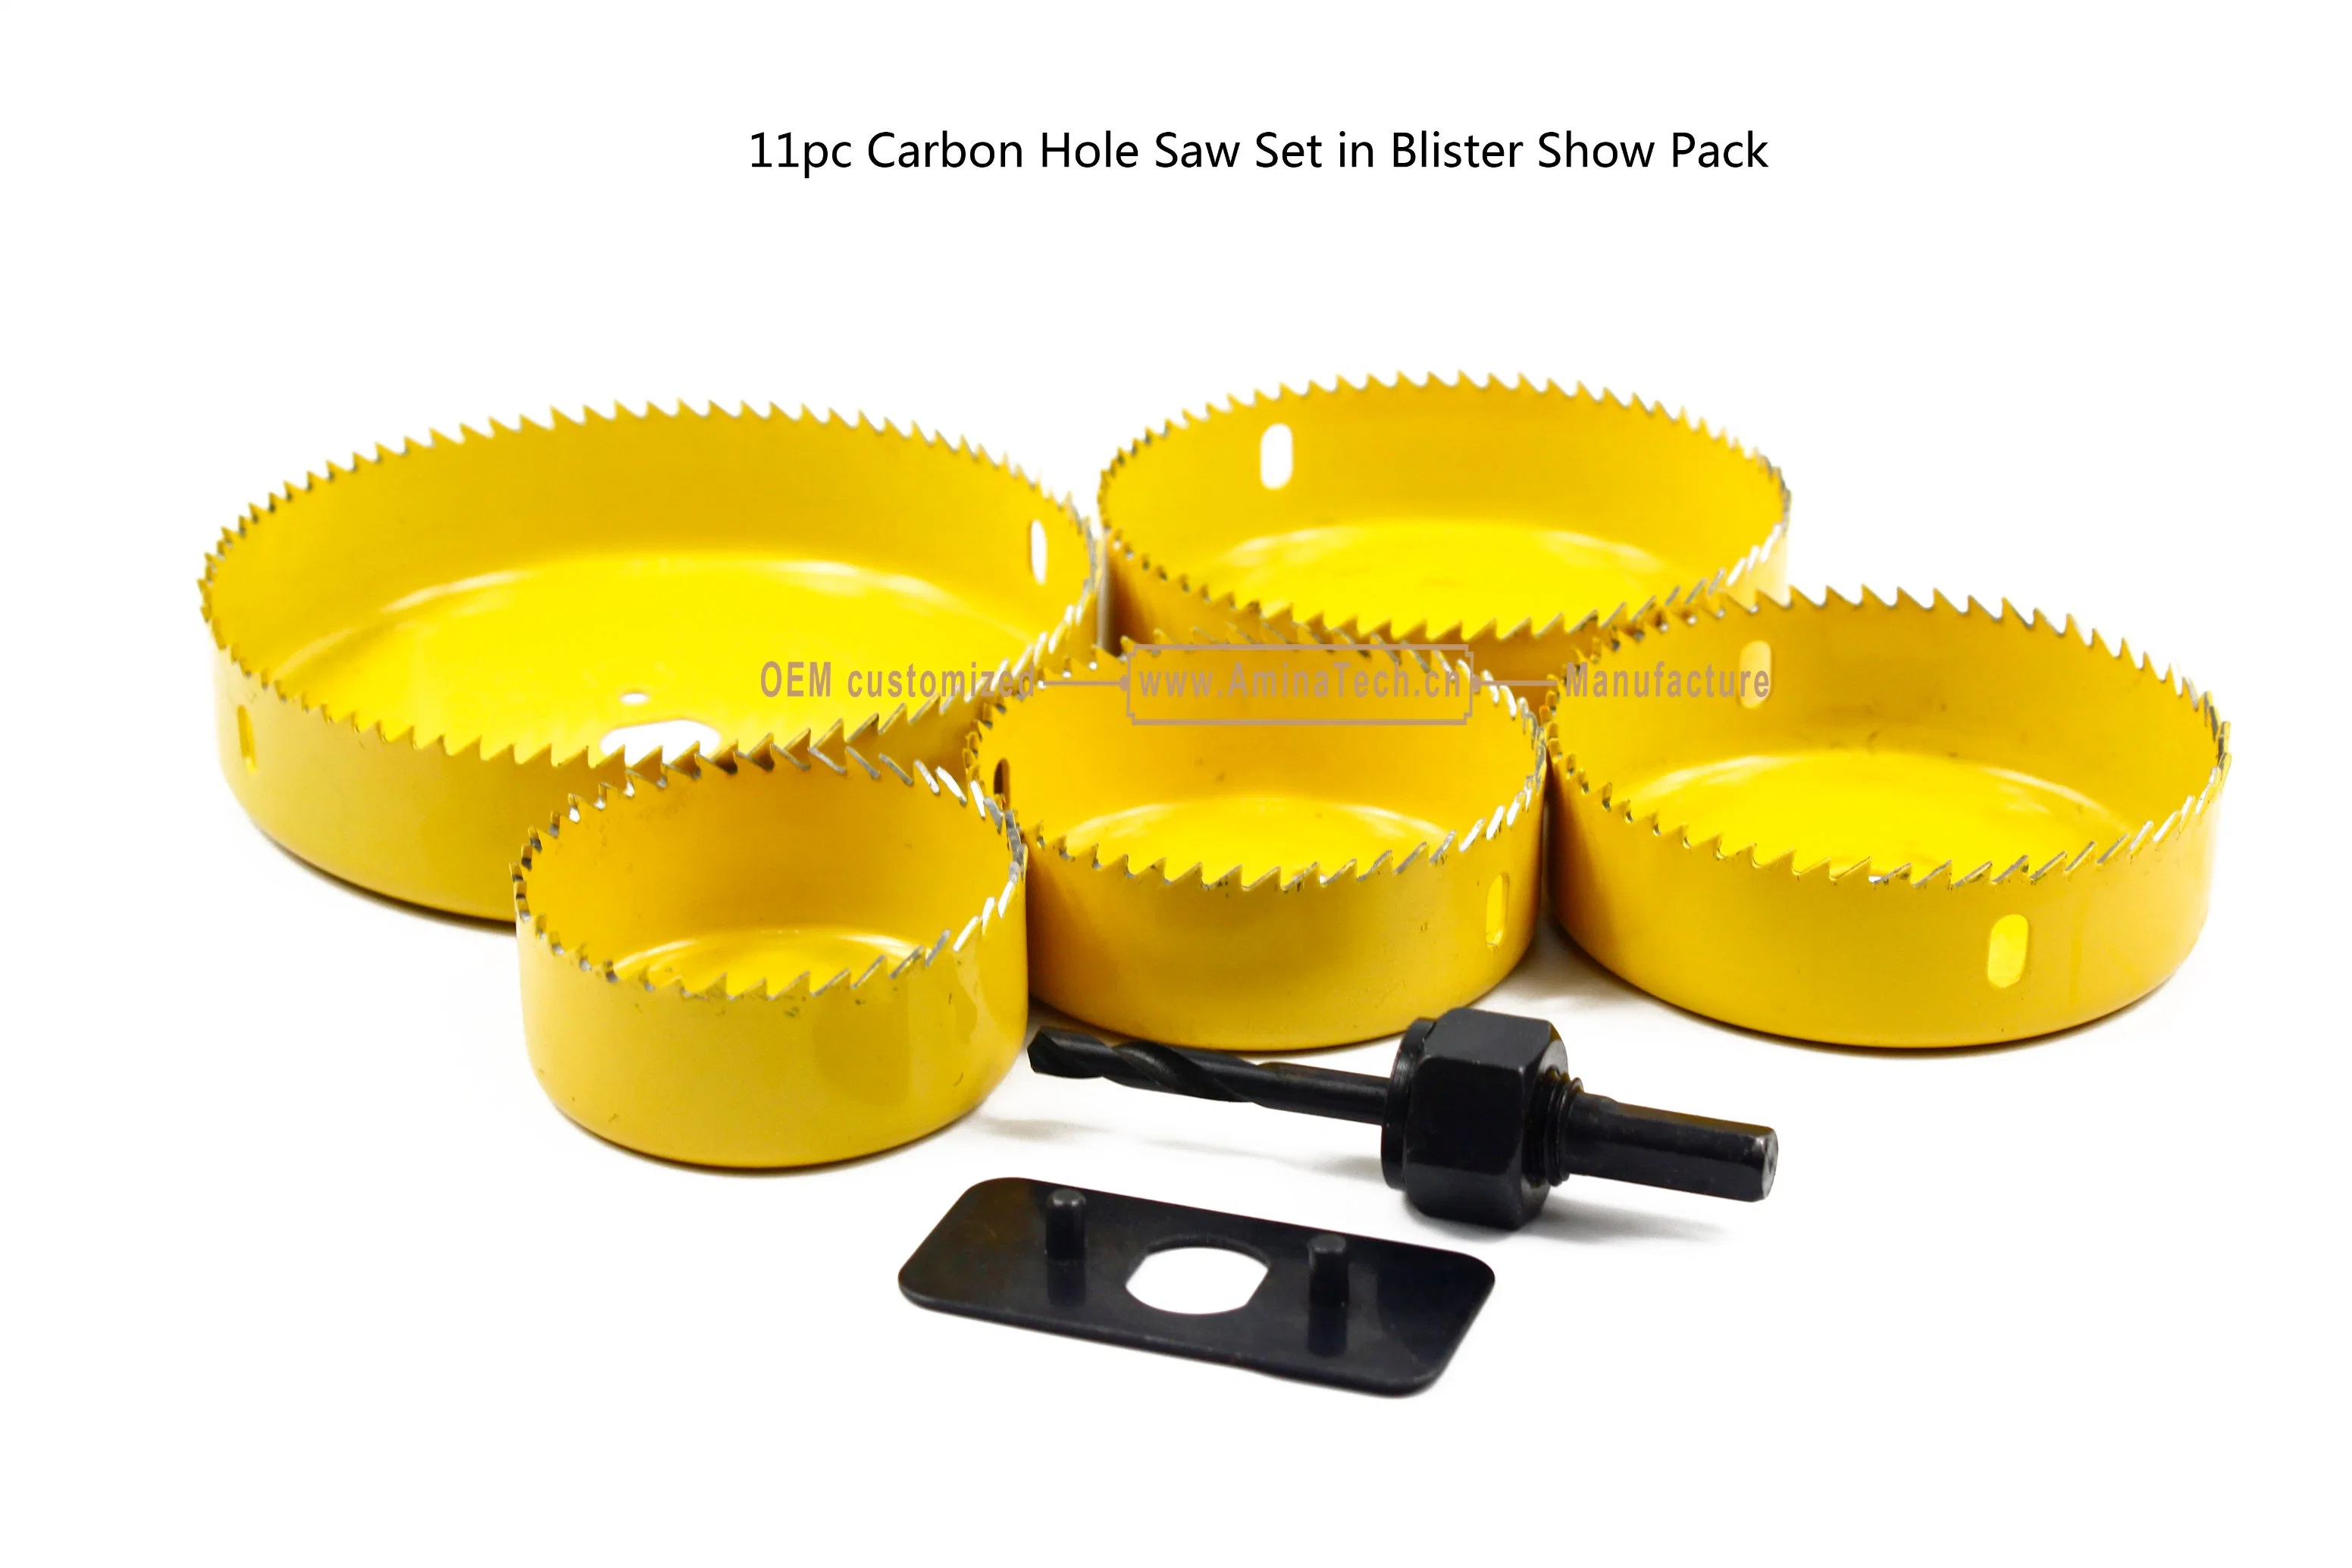 11pc Carbon Hole Saw Set in Blister Show Pack